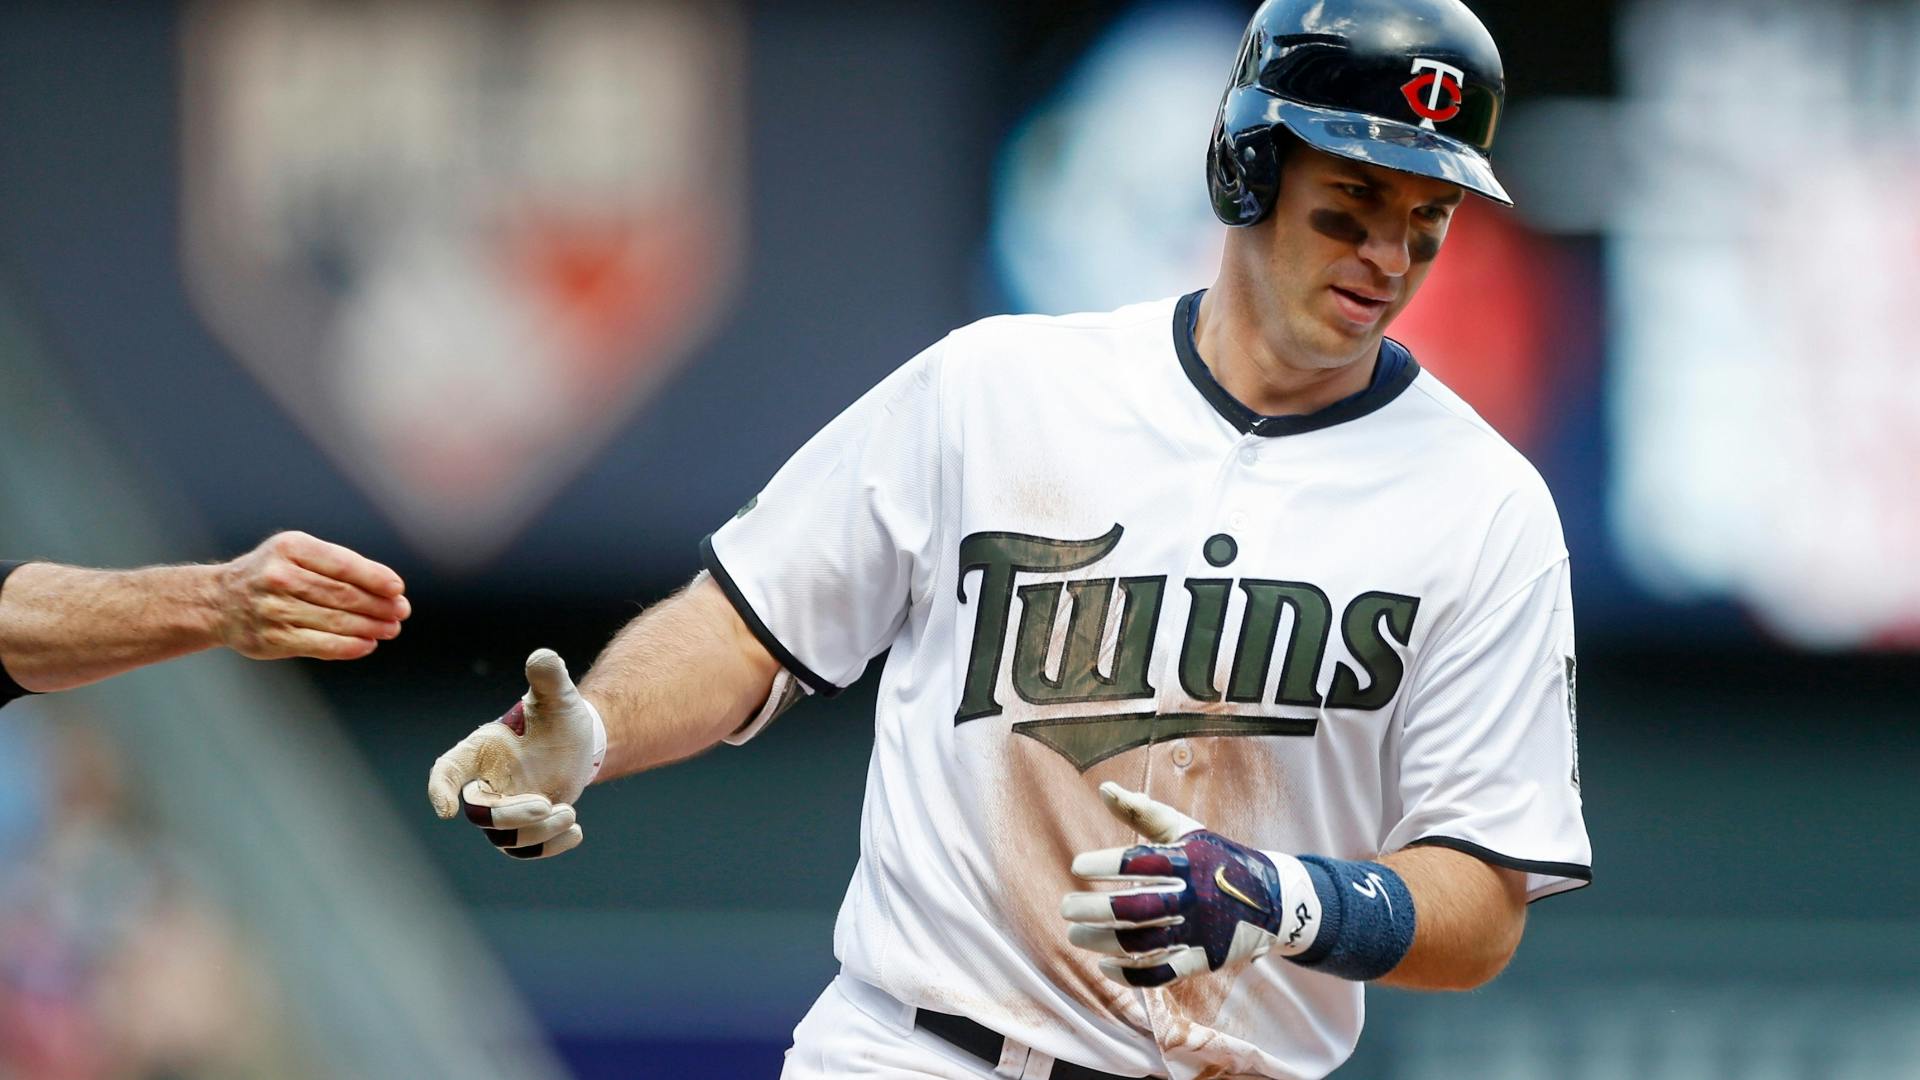 The Twins first baseman reached base seven times Sunday in an 8-6, 15-inning loss to Tampa Bay.